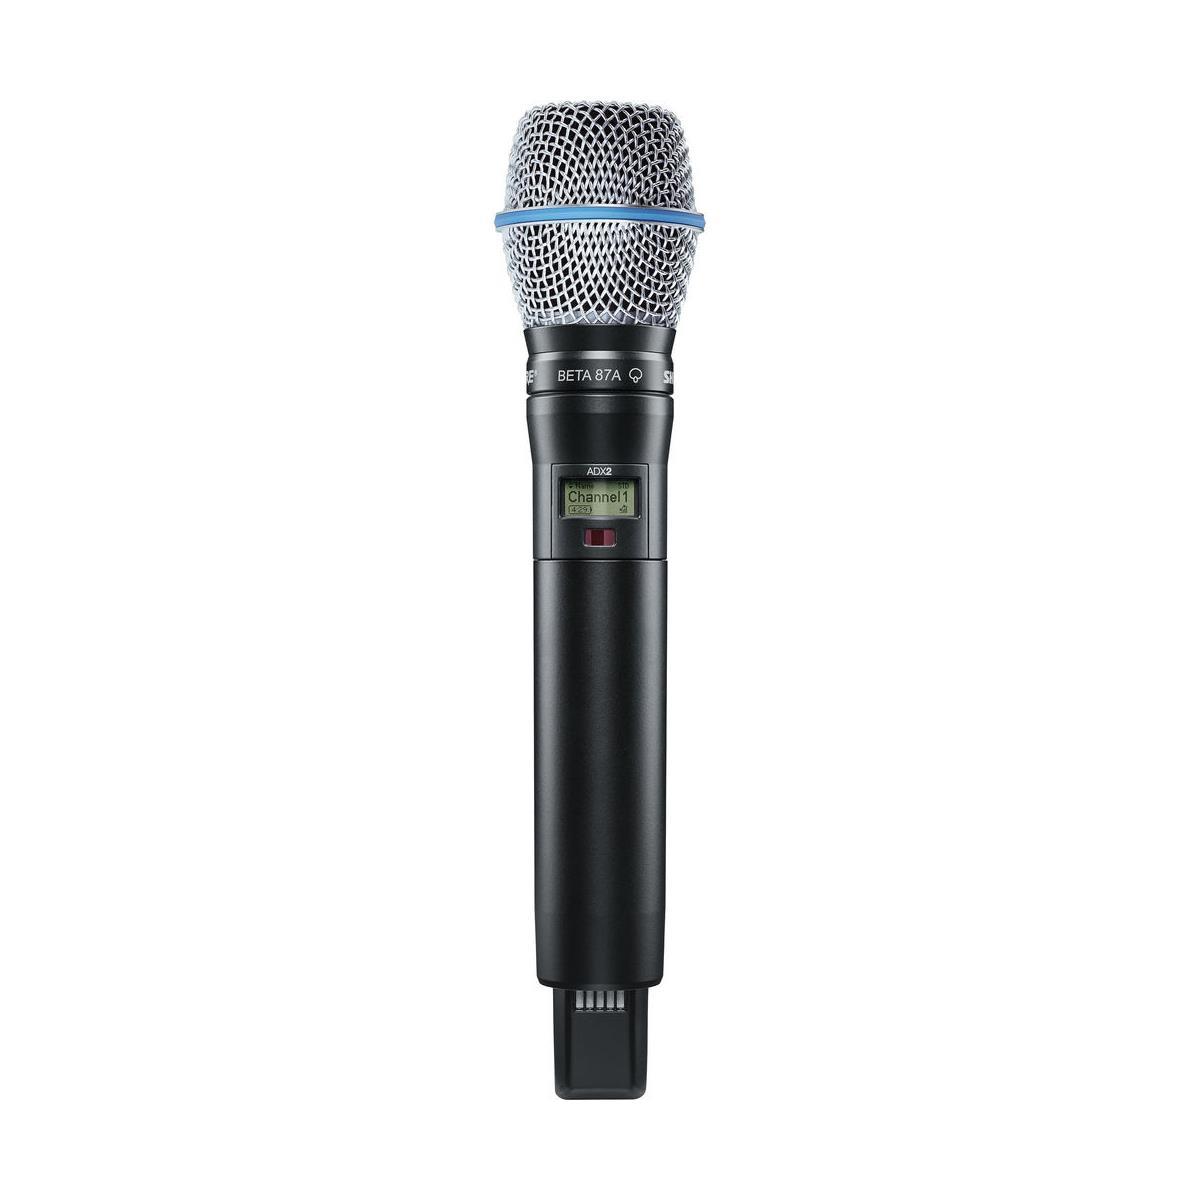 Shure ADX2 Handheld Transmitter with Beta 87A Mic Capsule, X55: 941 to 960MHz -  ADX2/B87A=-X55